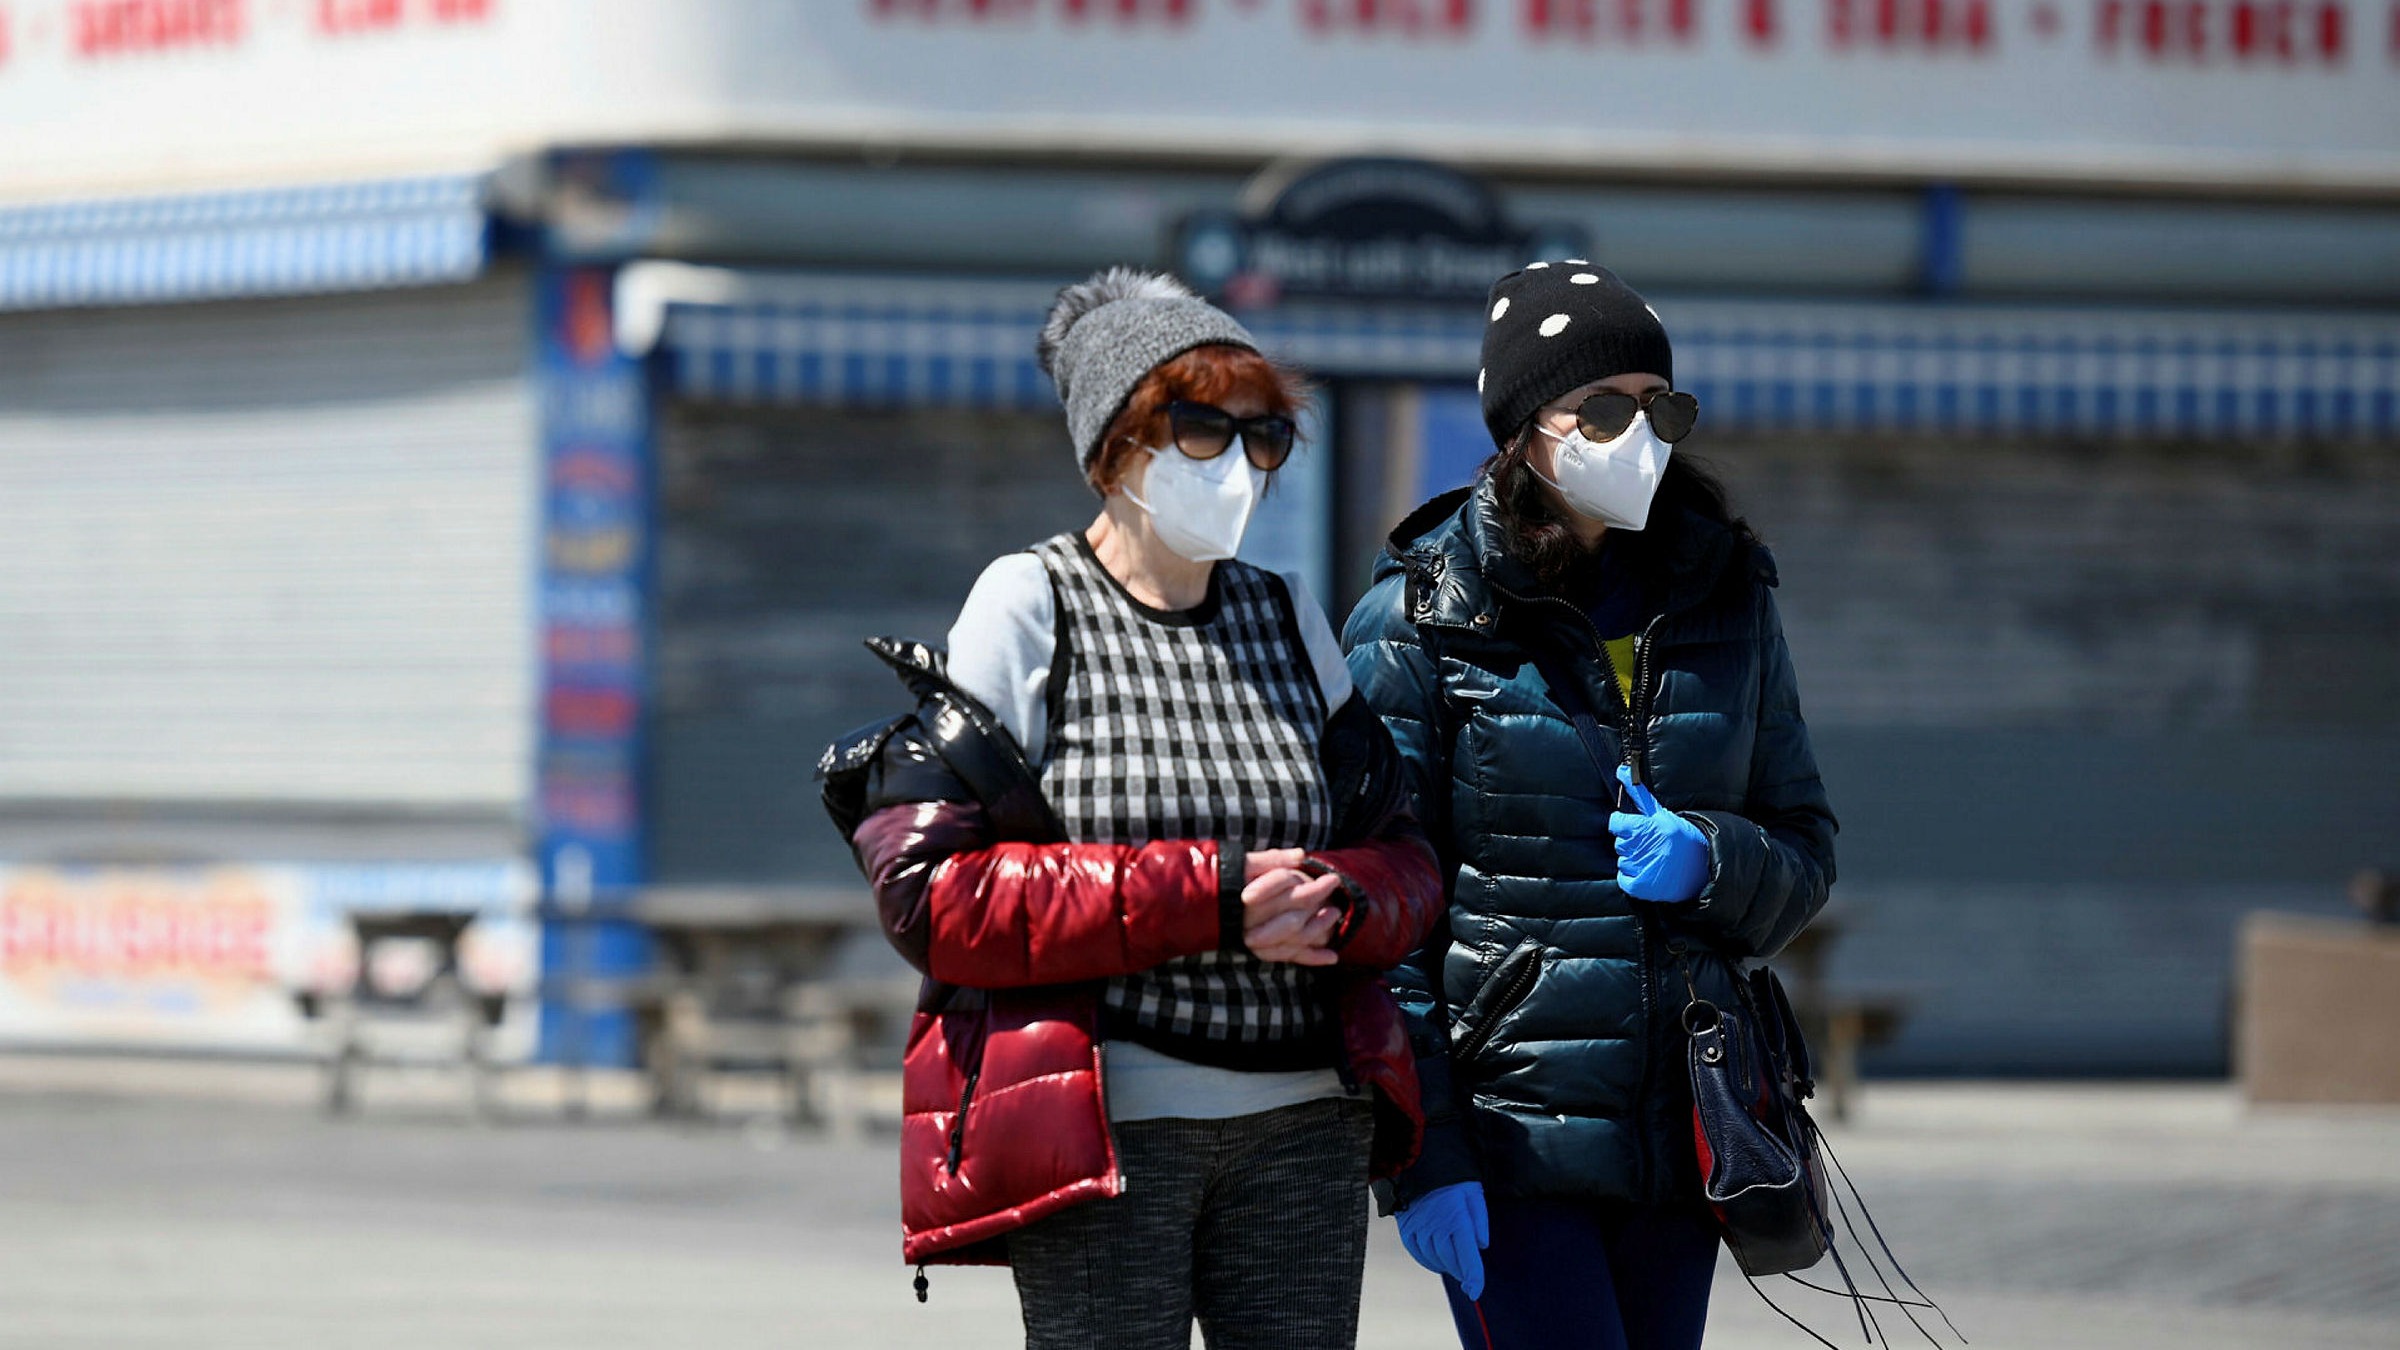 New York people to wear masks in places |